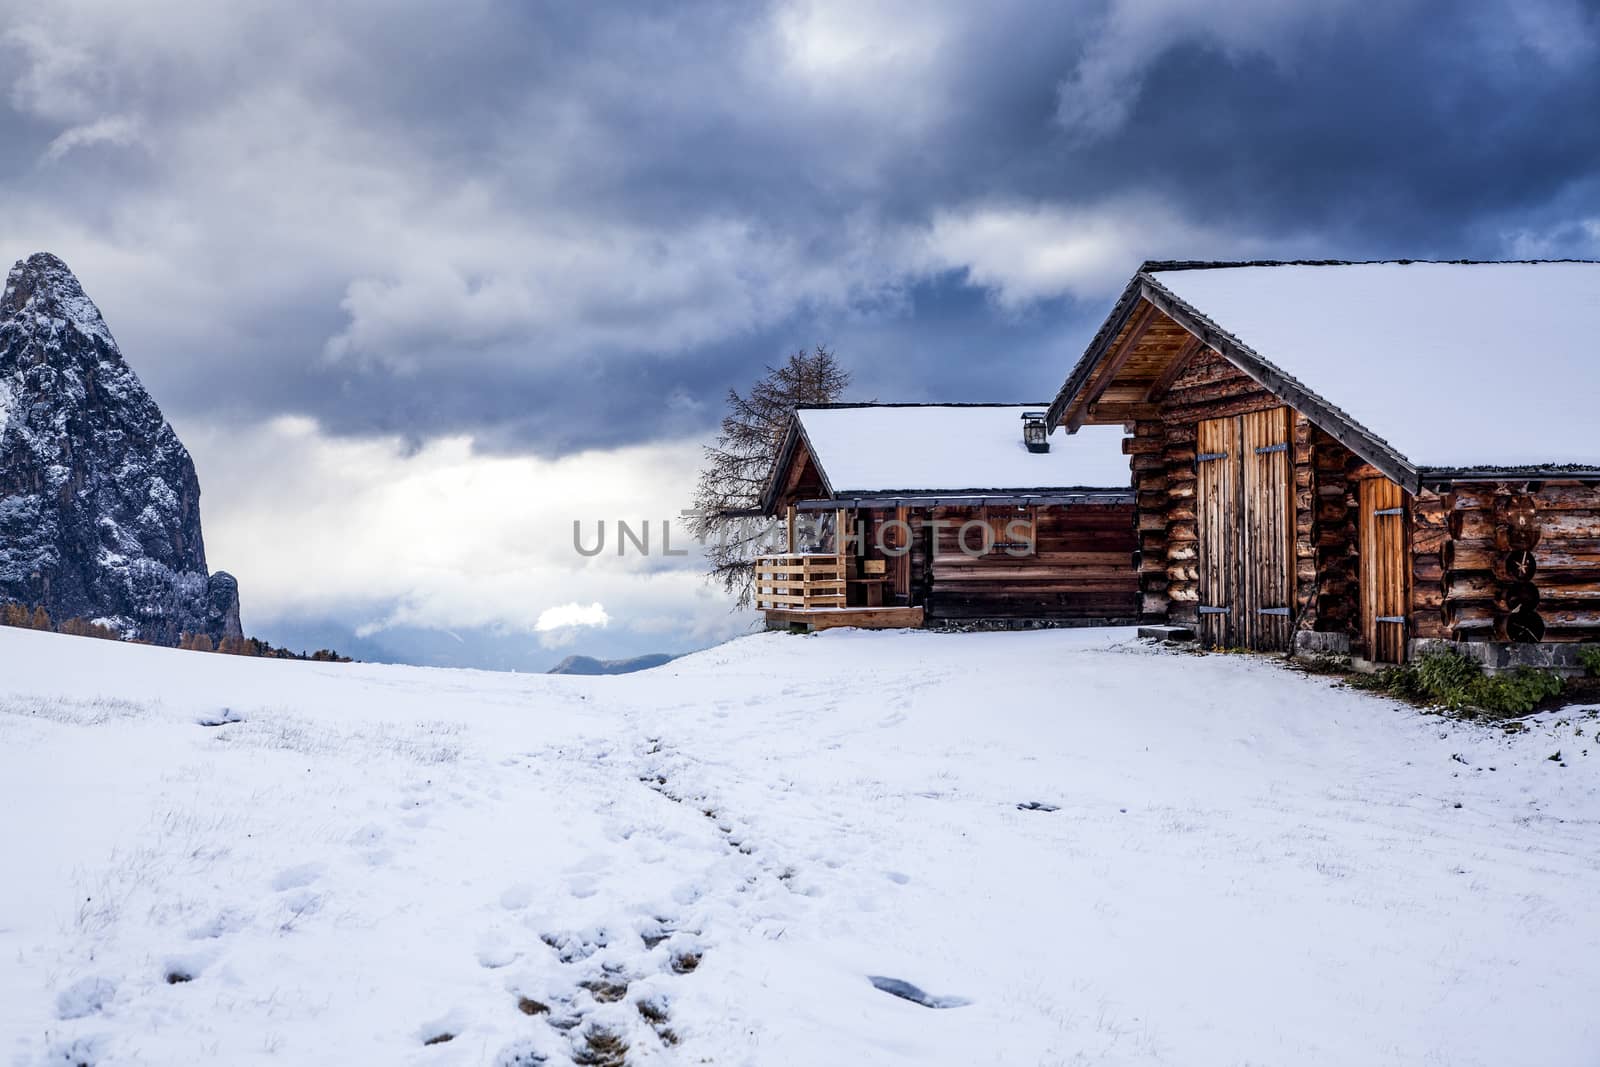 snowy early winter landscape in Alpe di Siusi.  Dolomites,  Italy - winter holidays destination